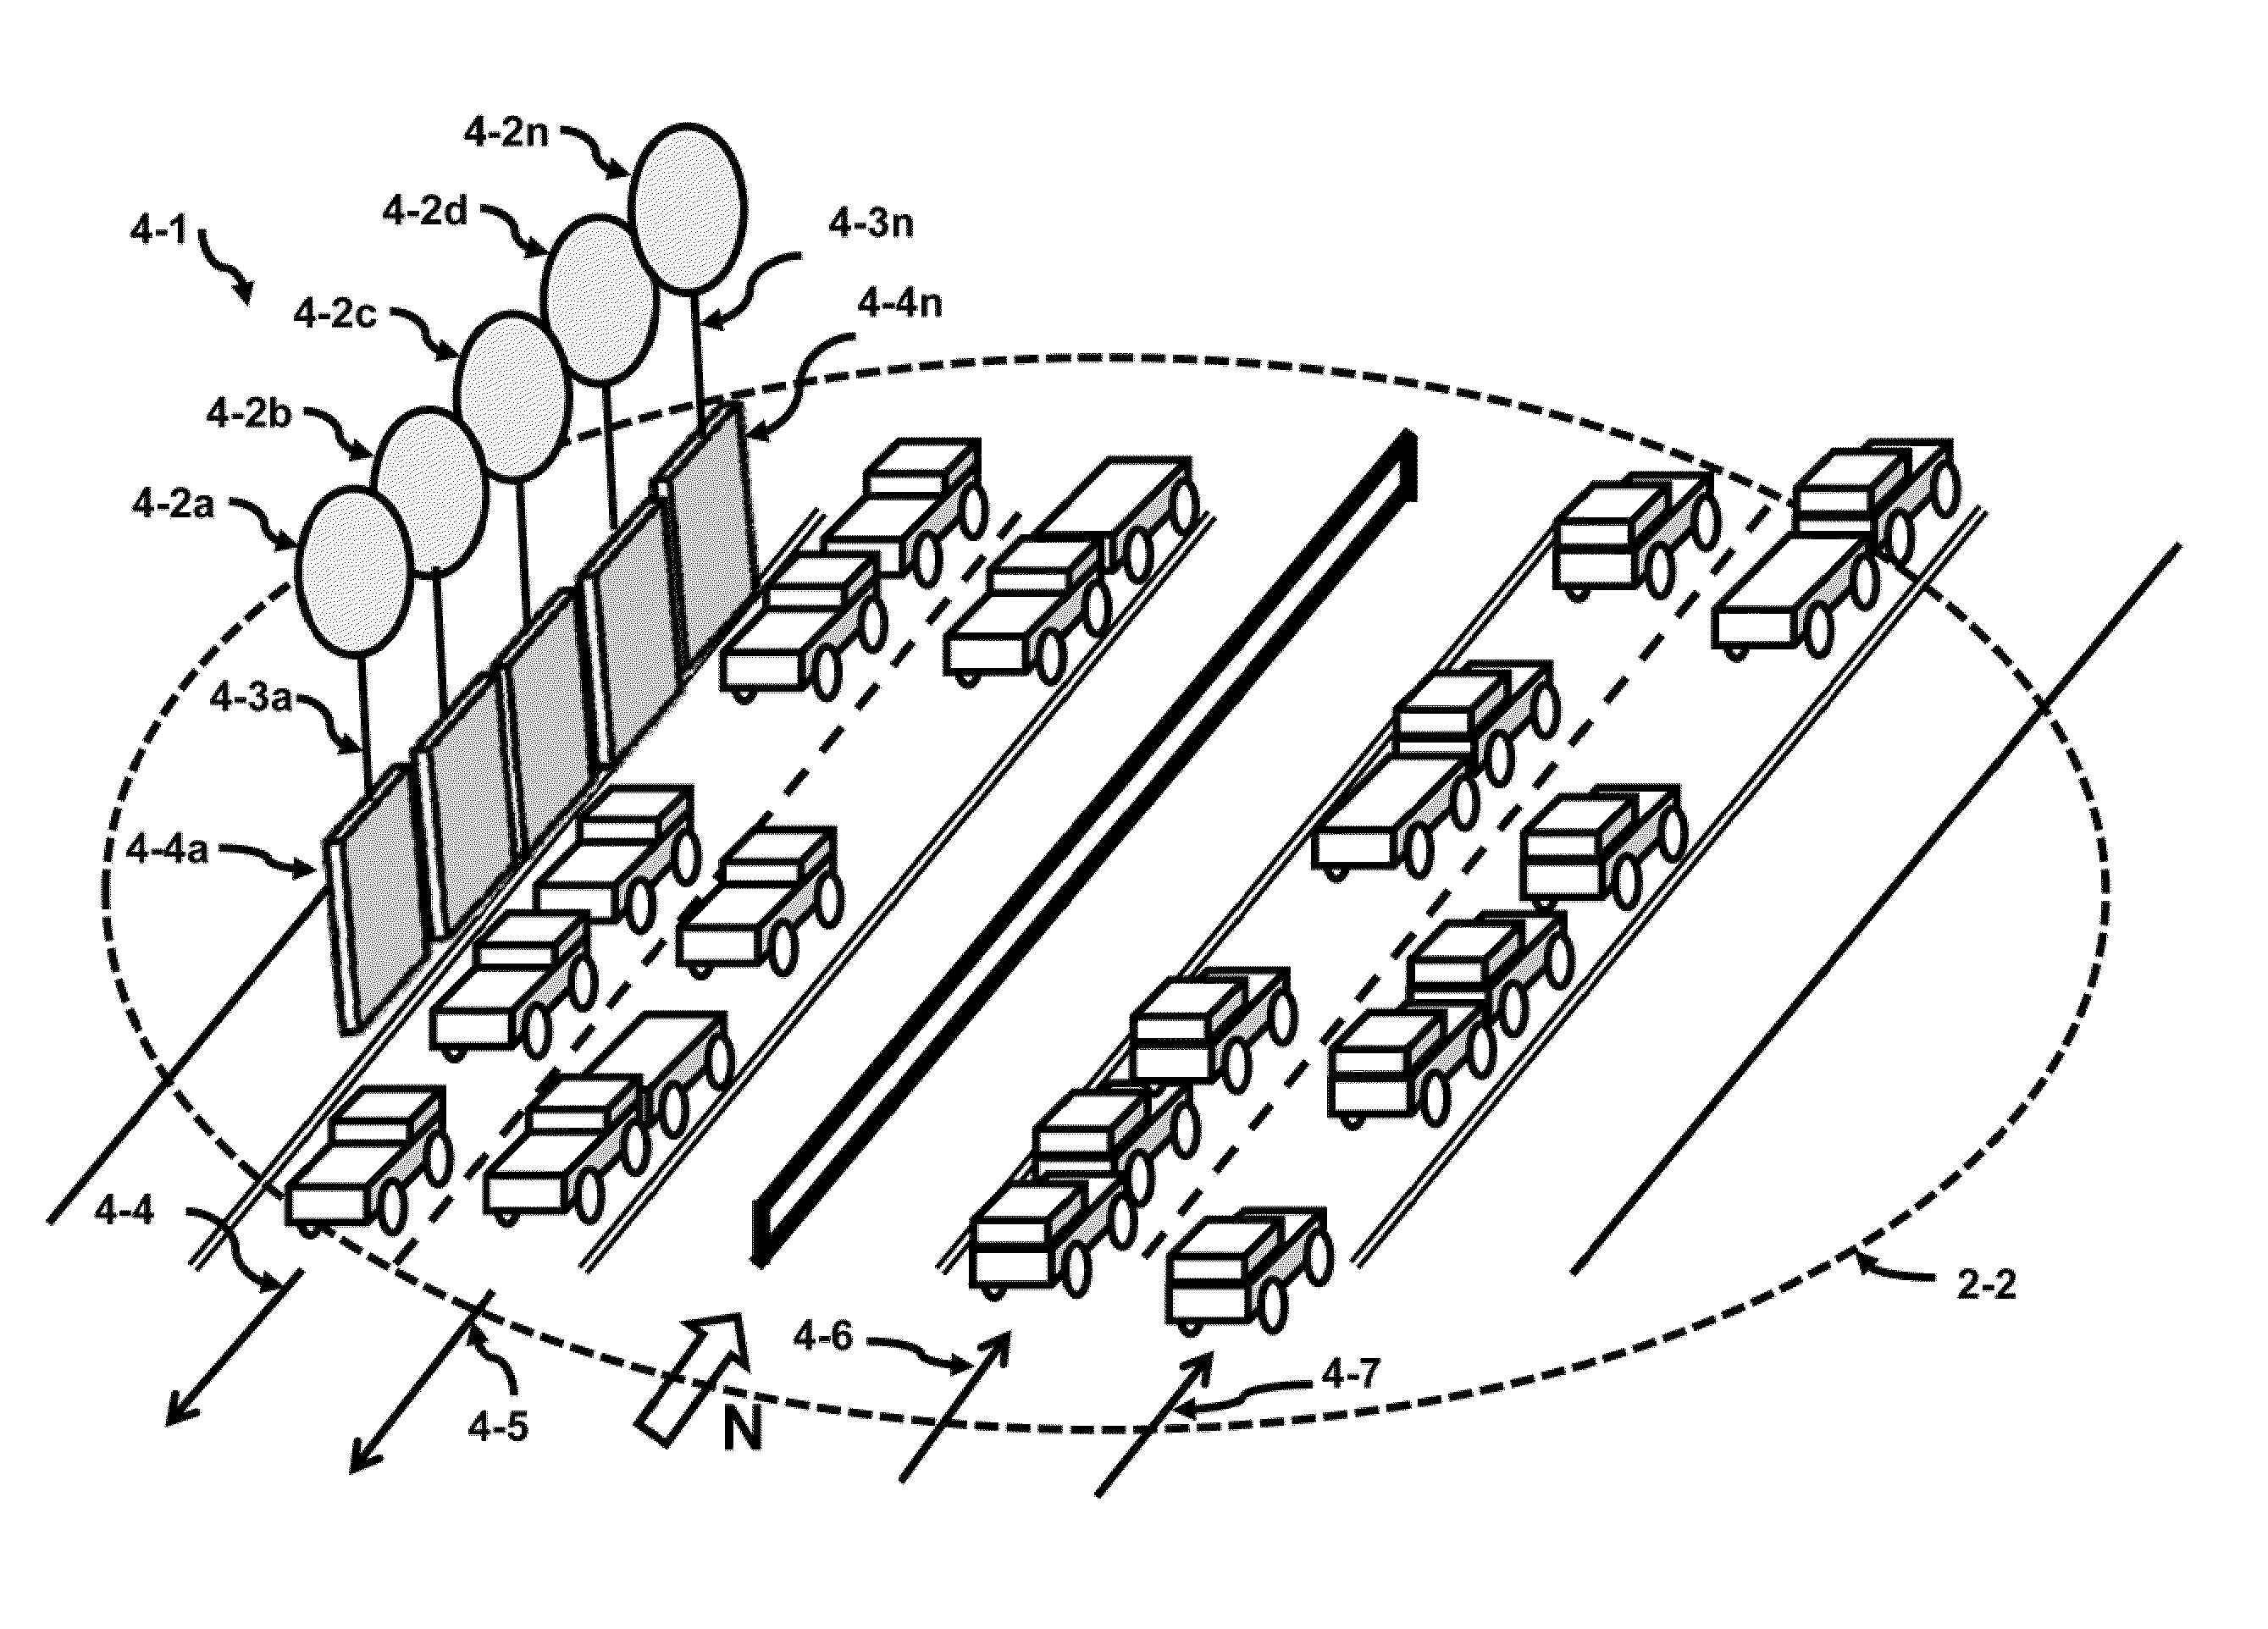 Method and apparatus for reducing and controlling highway congestion to save on fuel costs